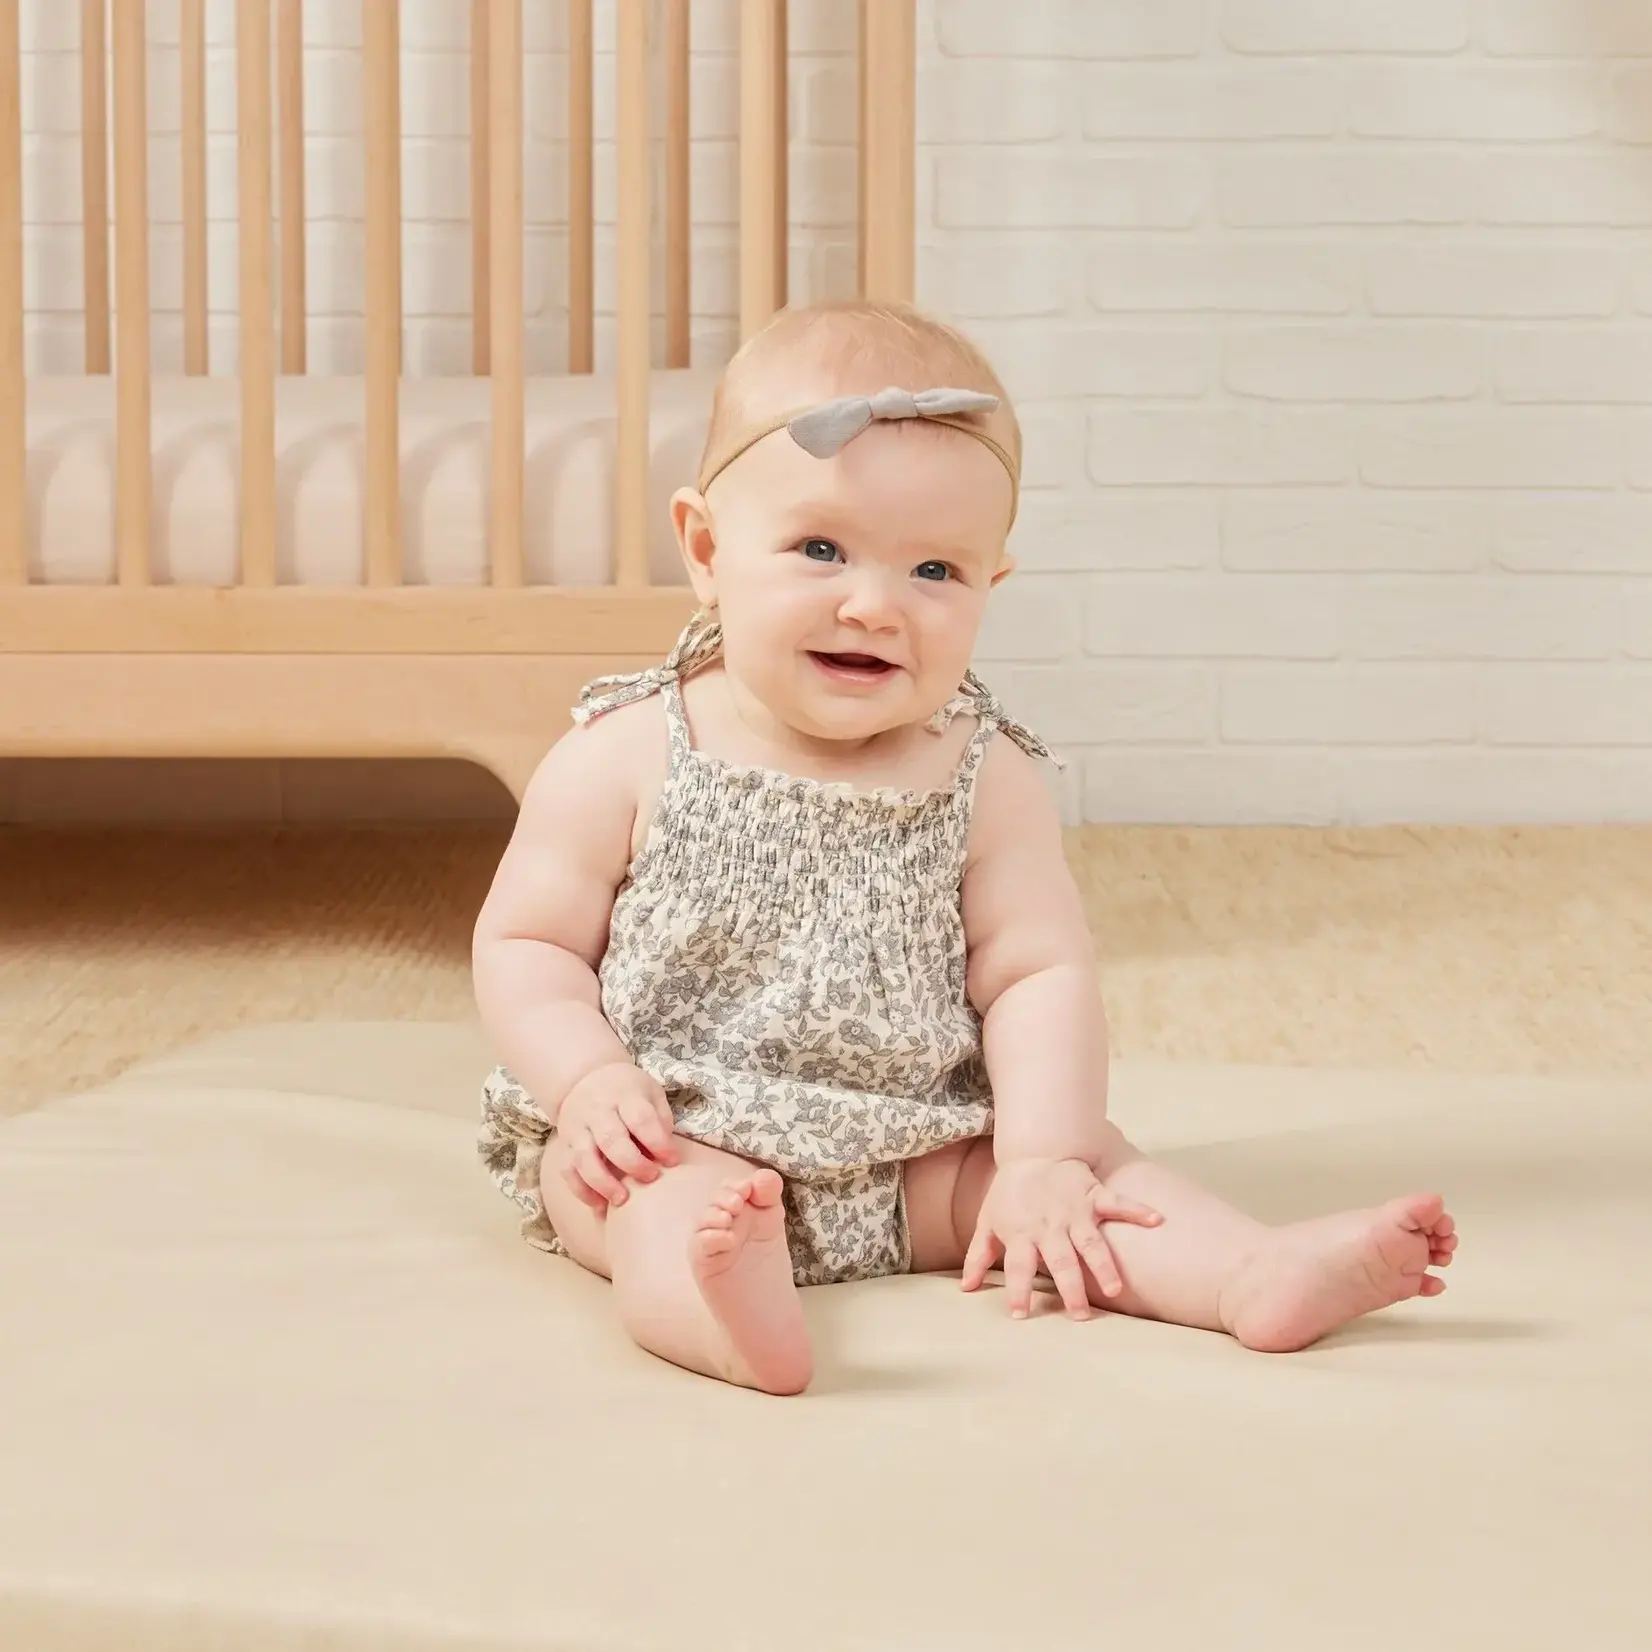 Quincy Mae Quincy Mae French Garden Betty Romper